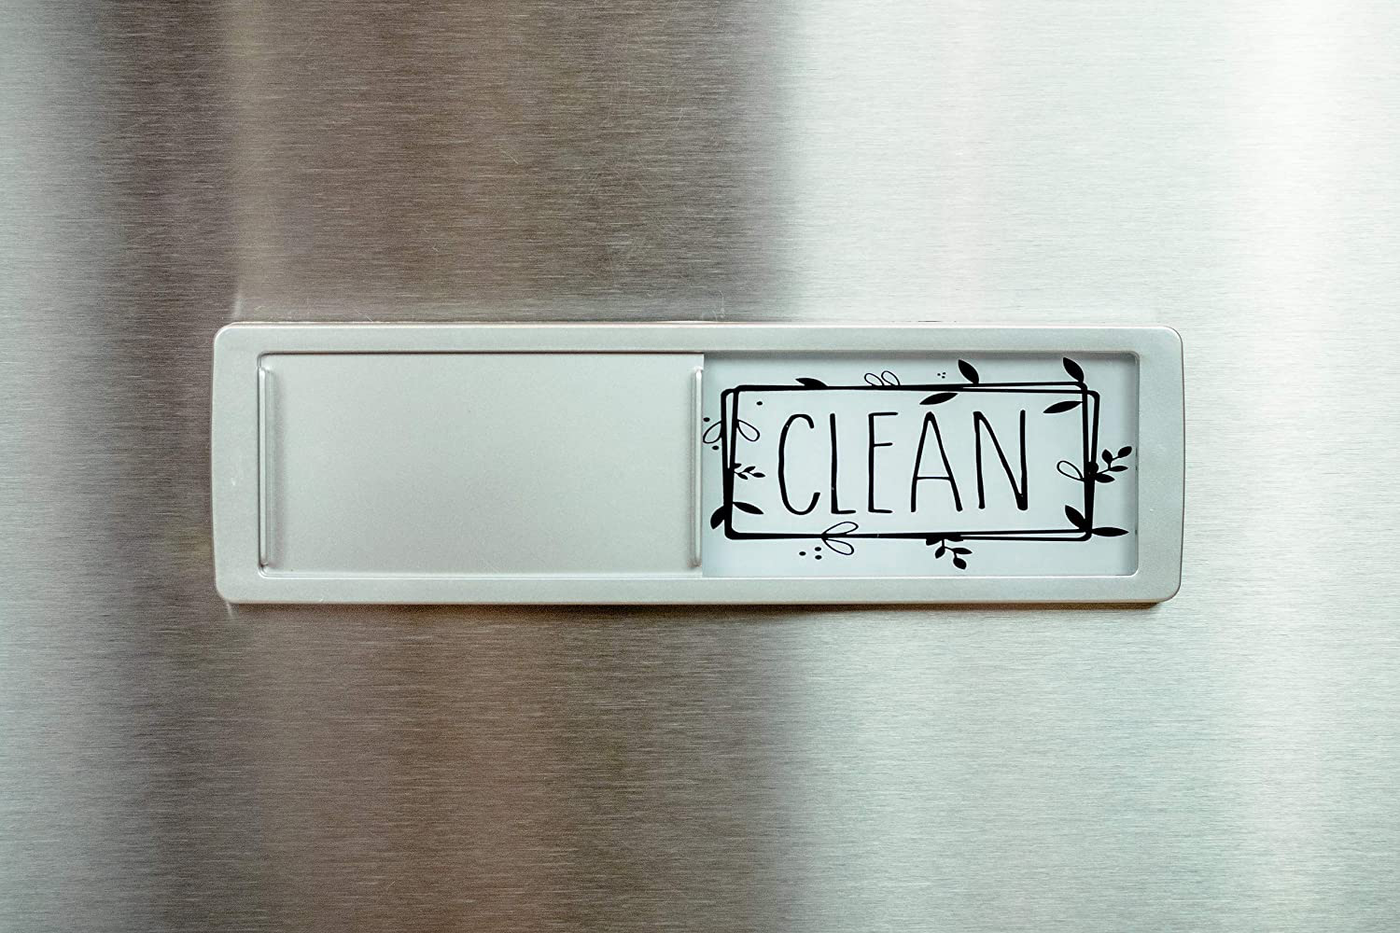 BabyPop! Newest Design Dishwasher Magnet Clean Dirty Sign Indicator, Trendy Universal Kitchen Dish Washer Refrigerator Magnet, Super Strong Magnet with Stickers for Kitchen Organization and Storage